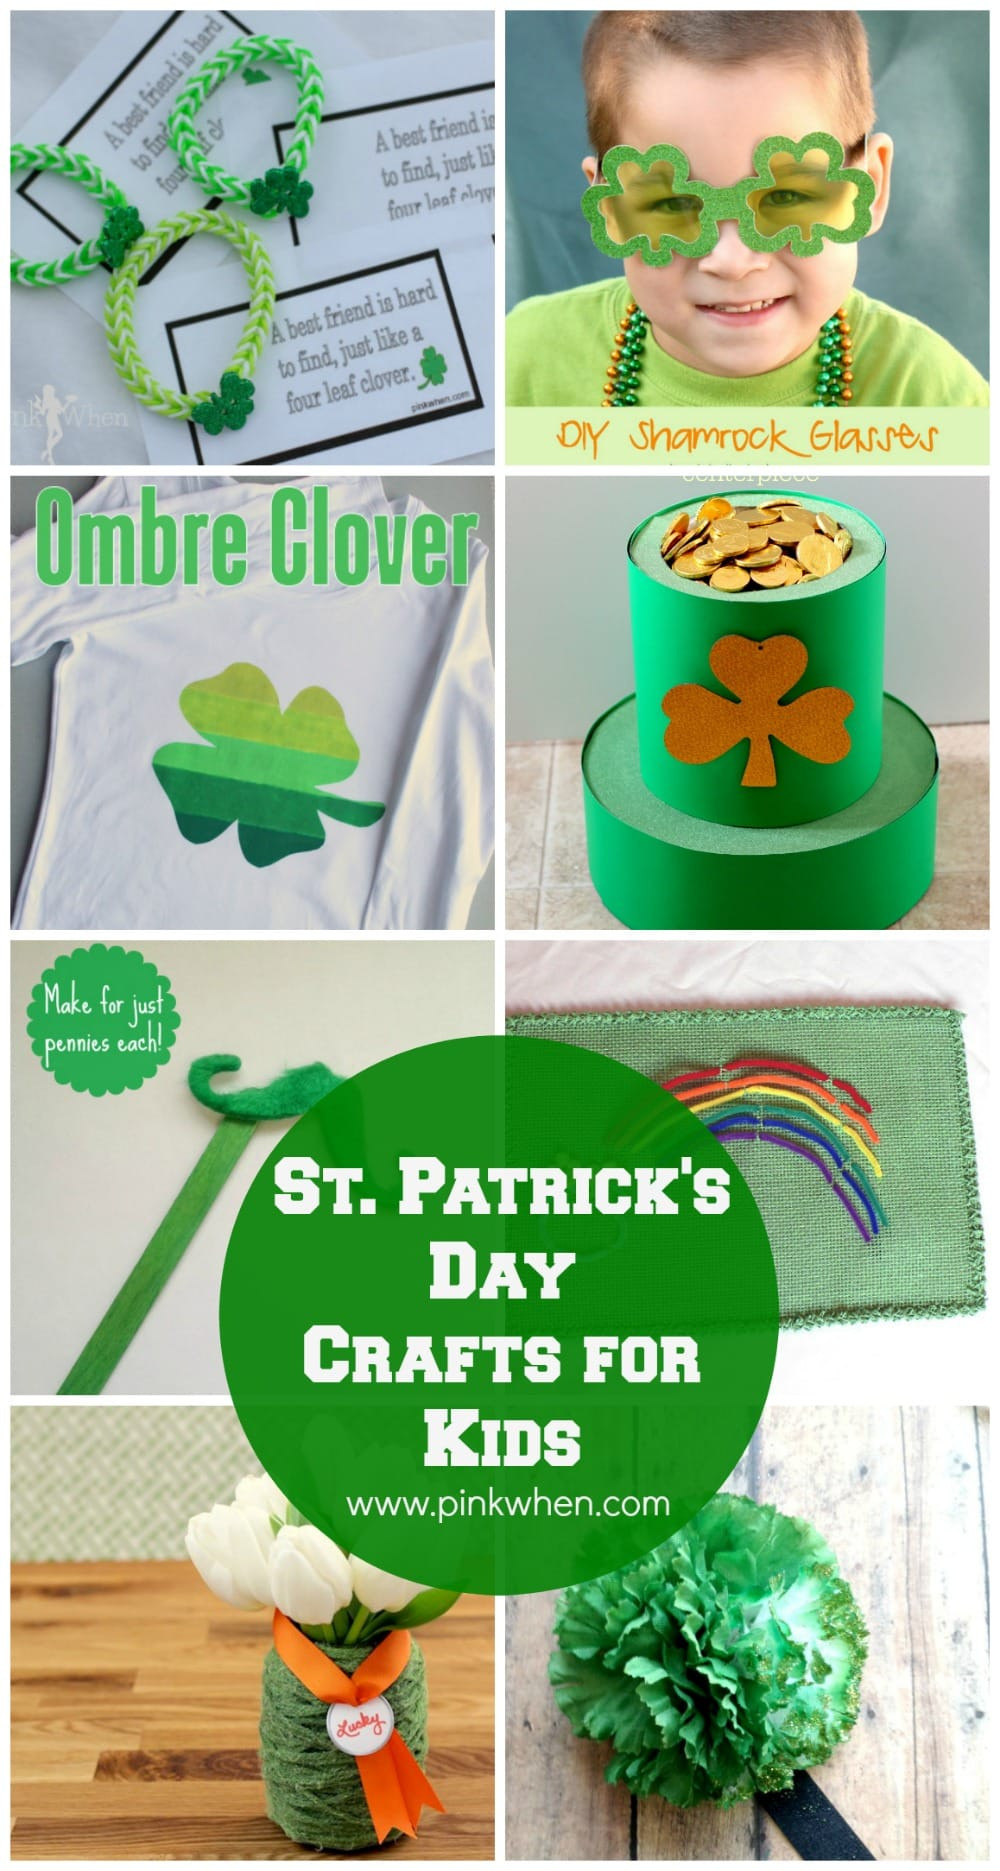 Saint Patrick's Day Crafts
 10 St Patrick s Day Crafts for Kids PinkWhen